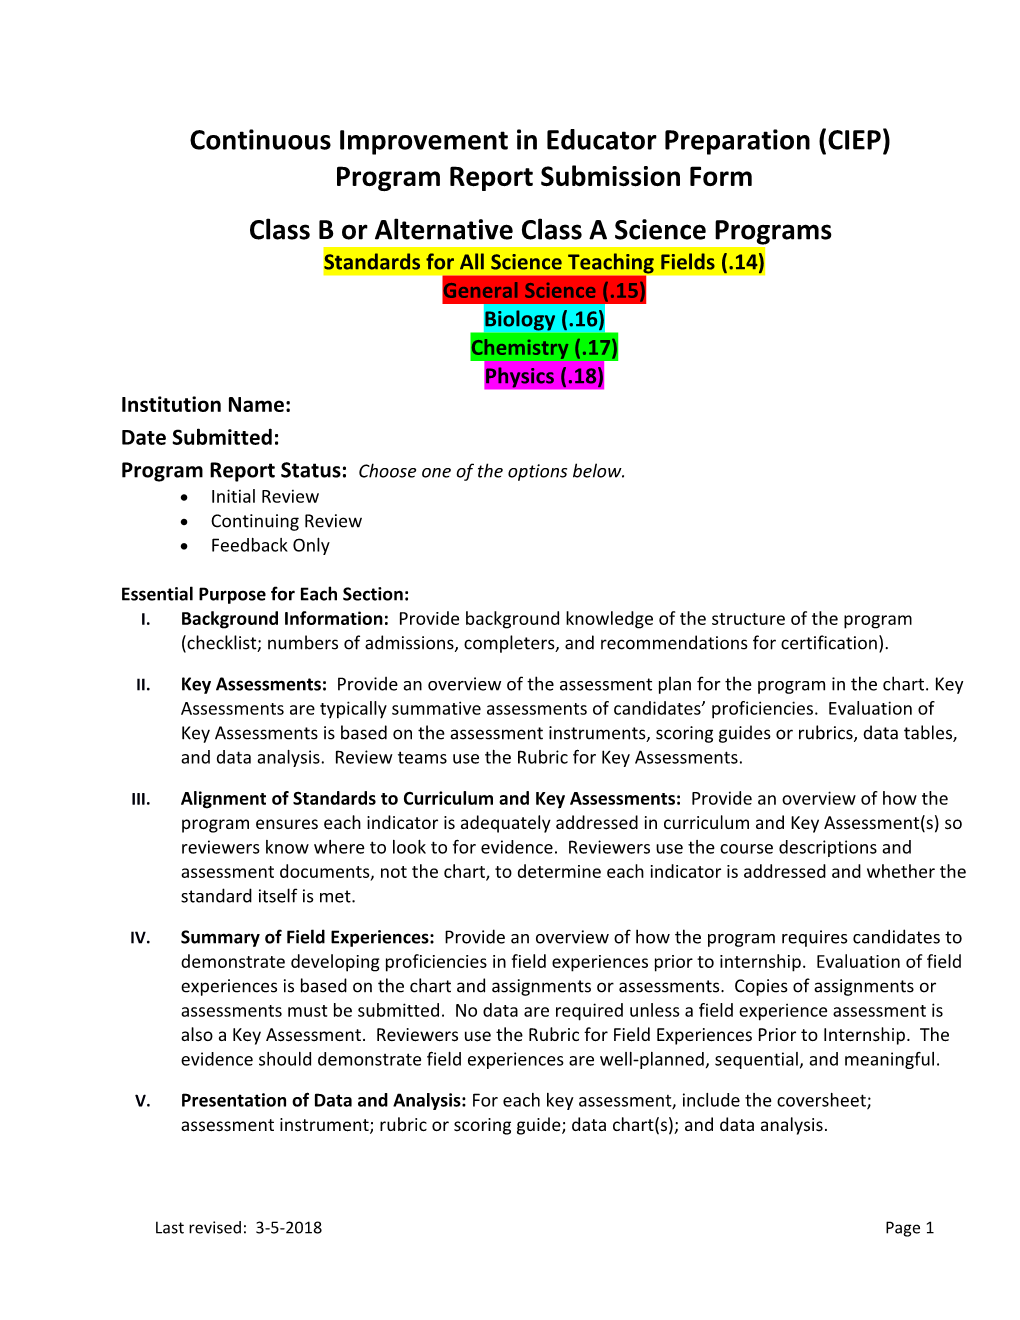 CIEP Template 14 - 18 All Sciences